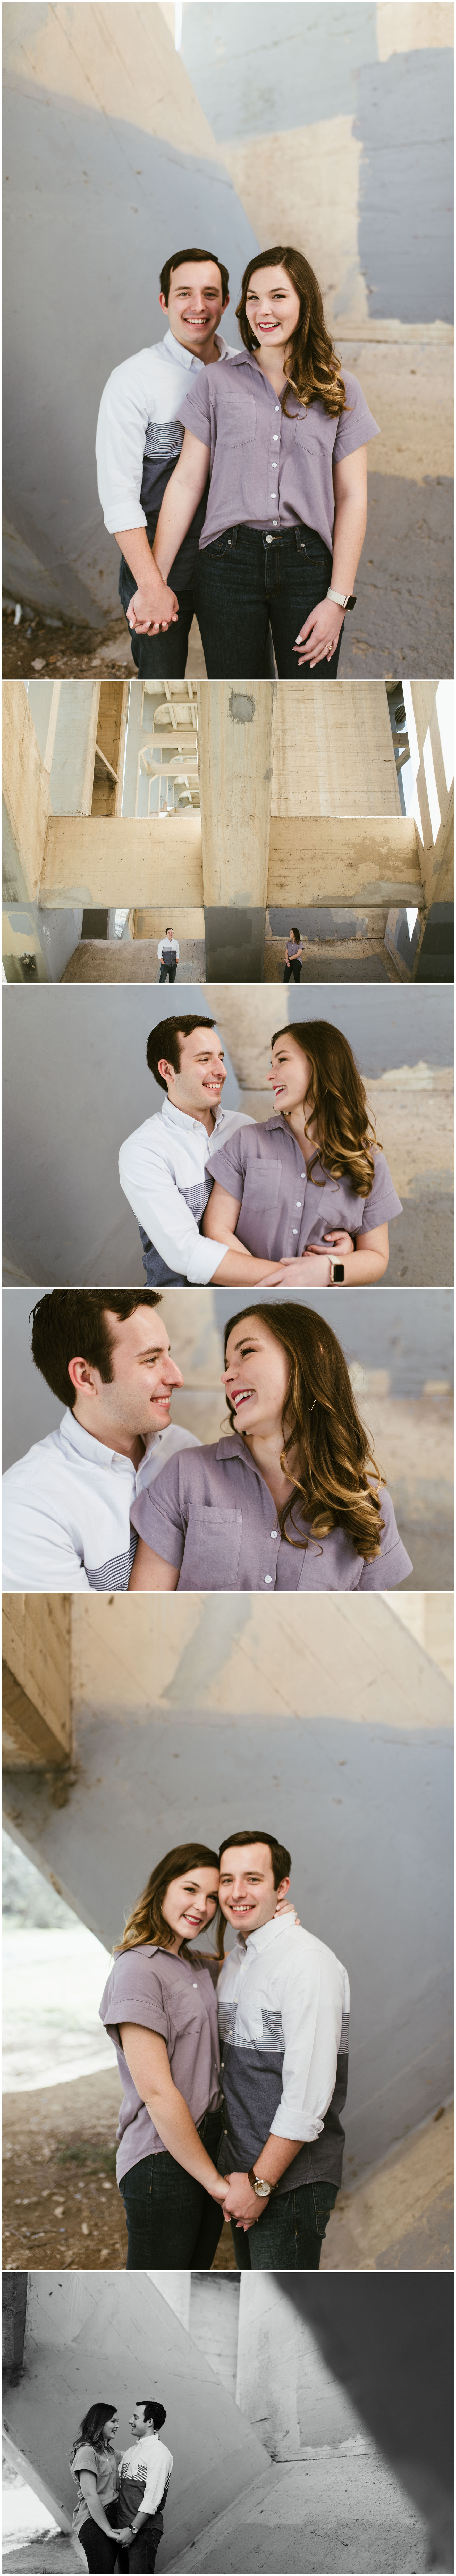  Downtown Fort Worth Engagement Session | Fort Worth Engagement Photographer | www.jordanmitchellphotography.com 